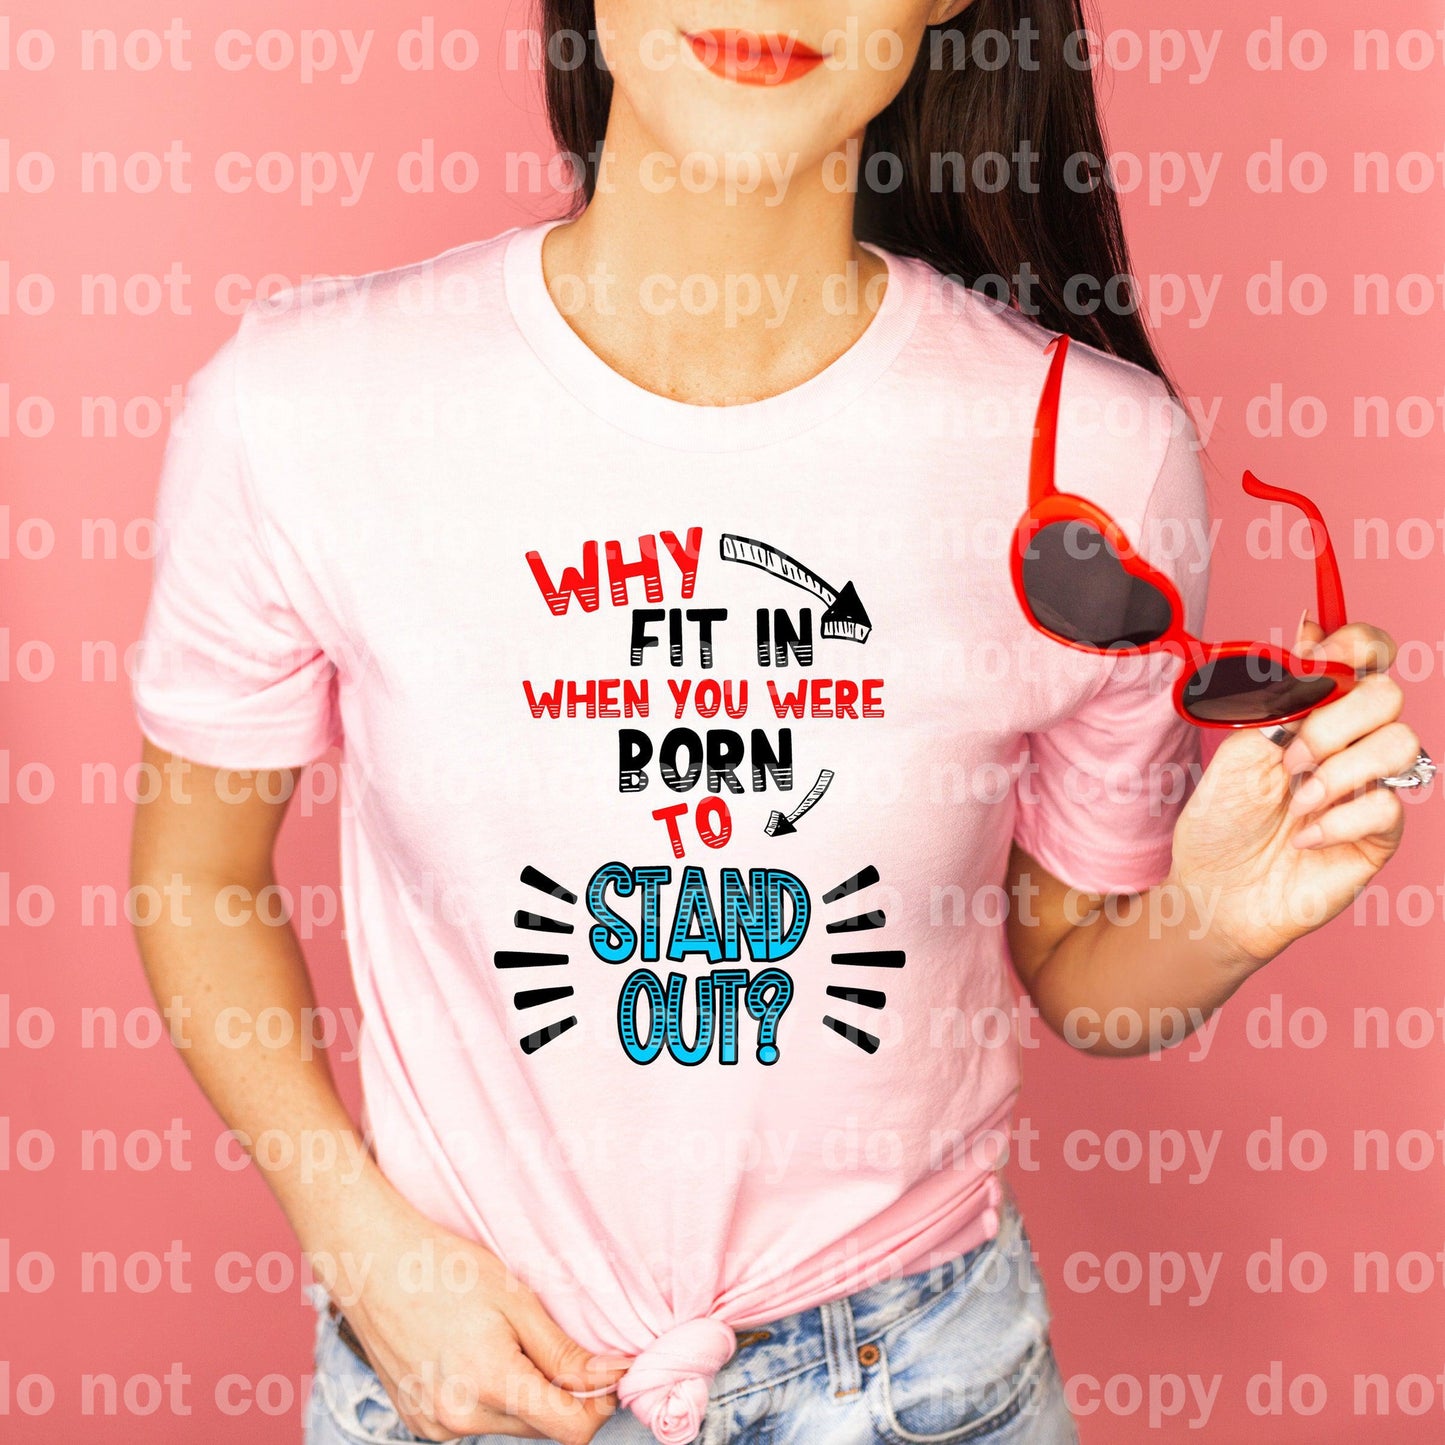 Why Fit In When You Where Born To Stand Out? Dream print transfer